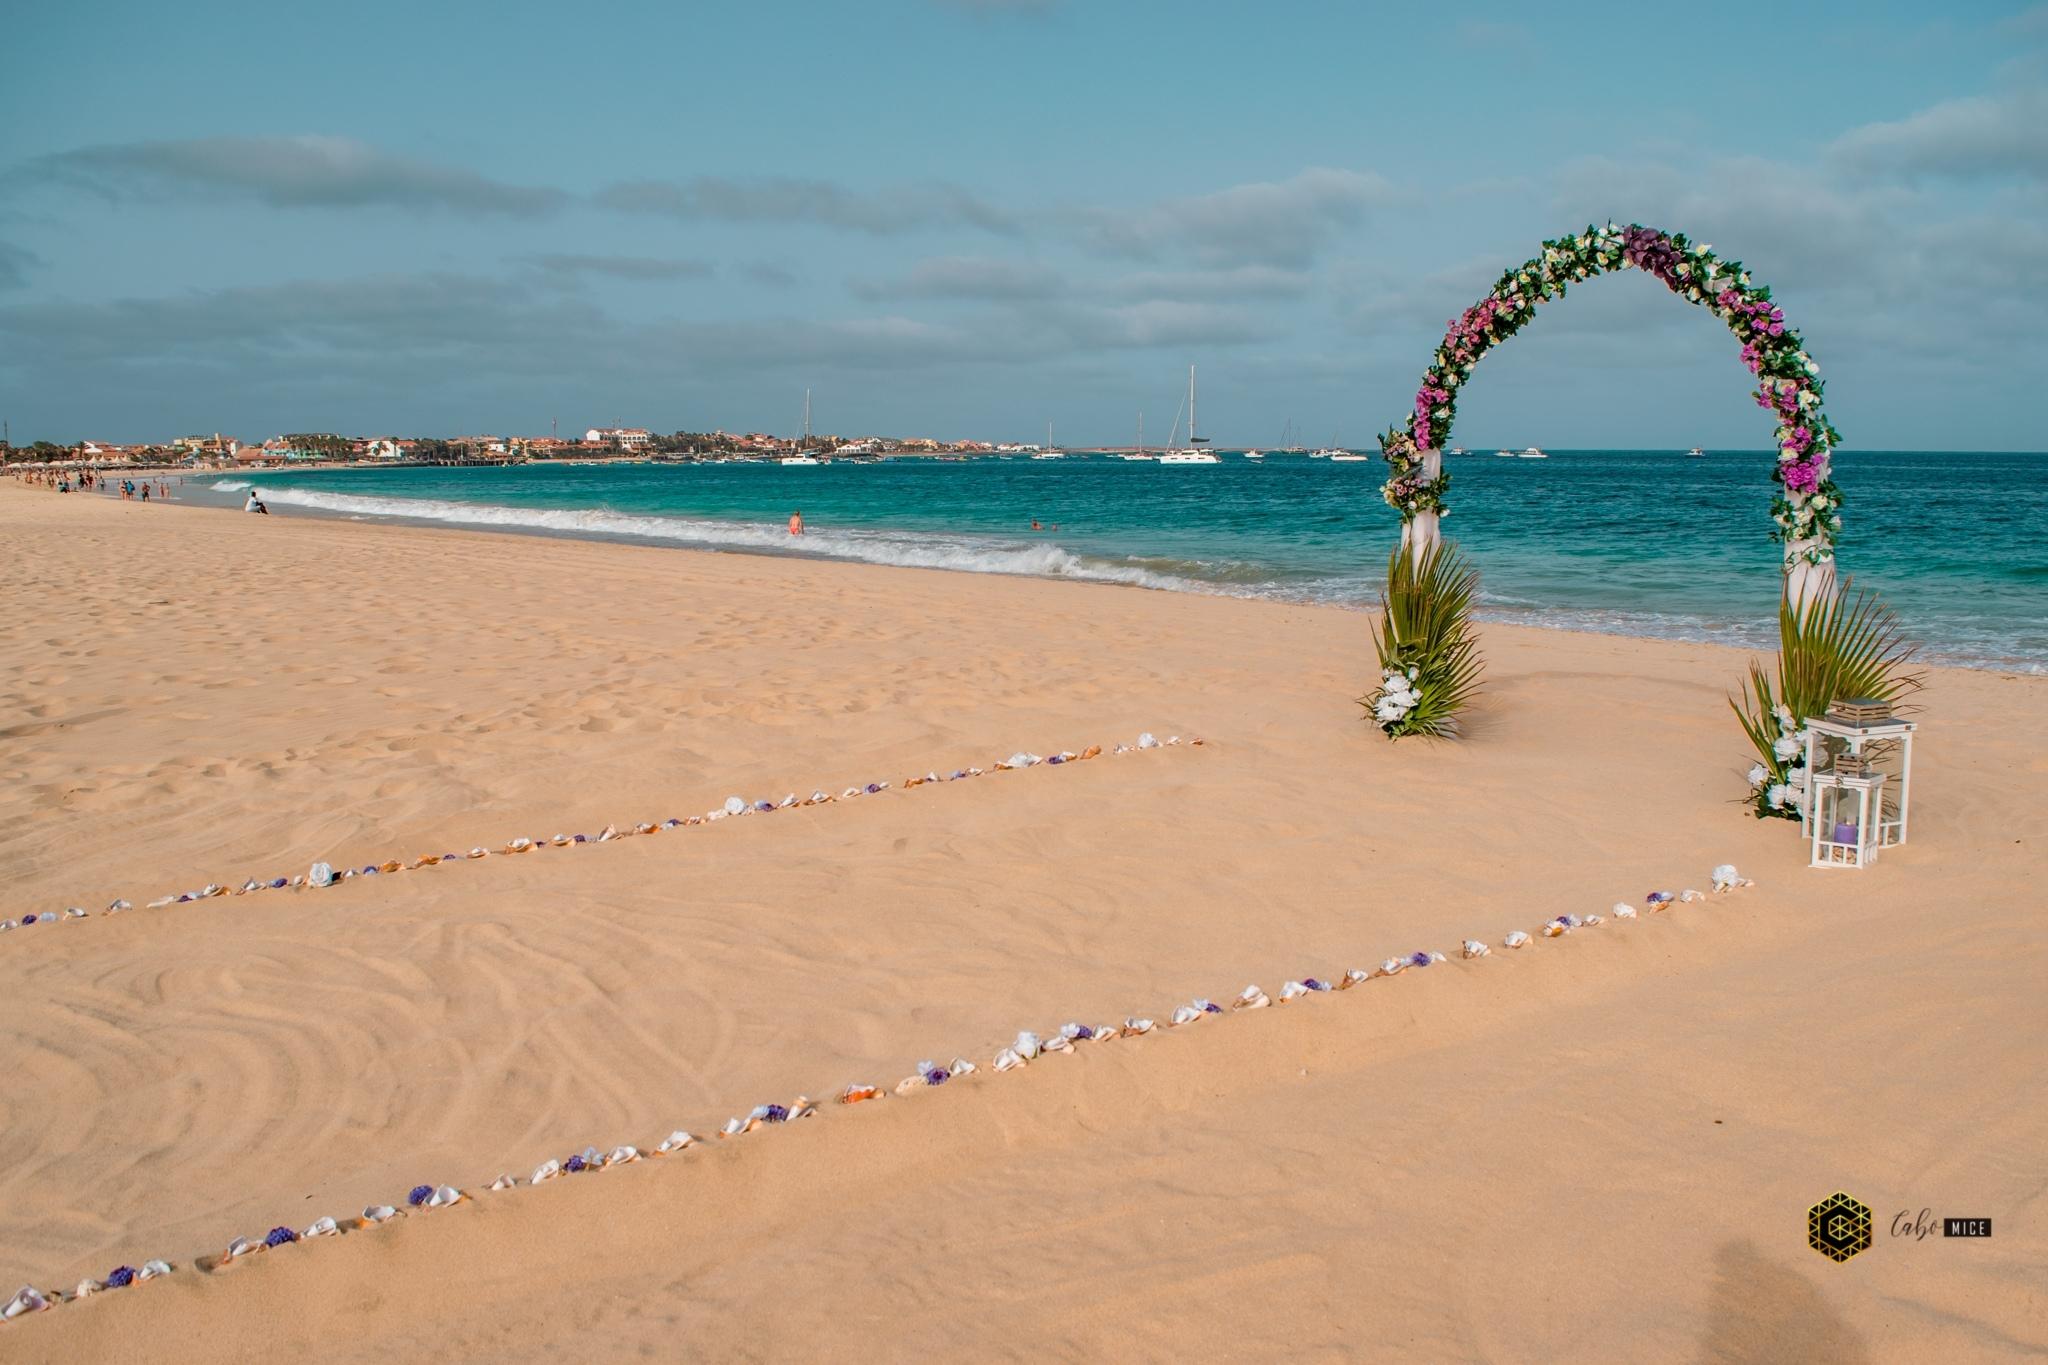 Book your wedding day in Hilton Cabo Verde Sal Resort